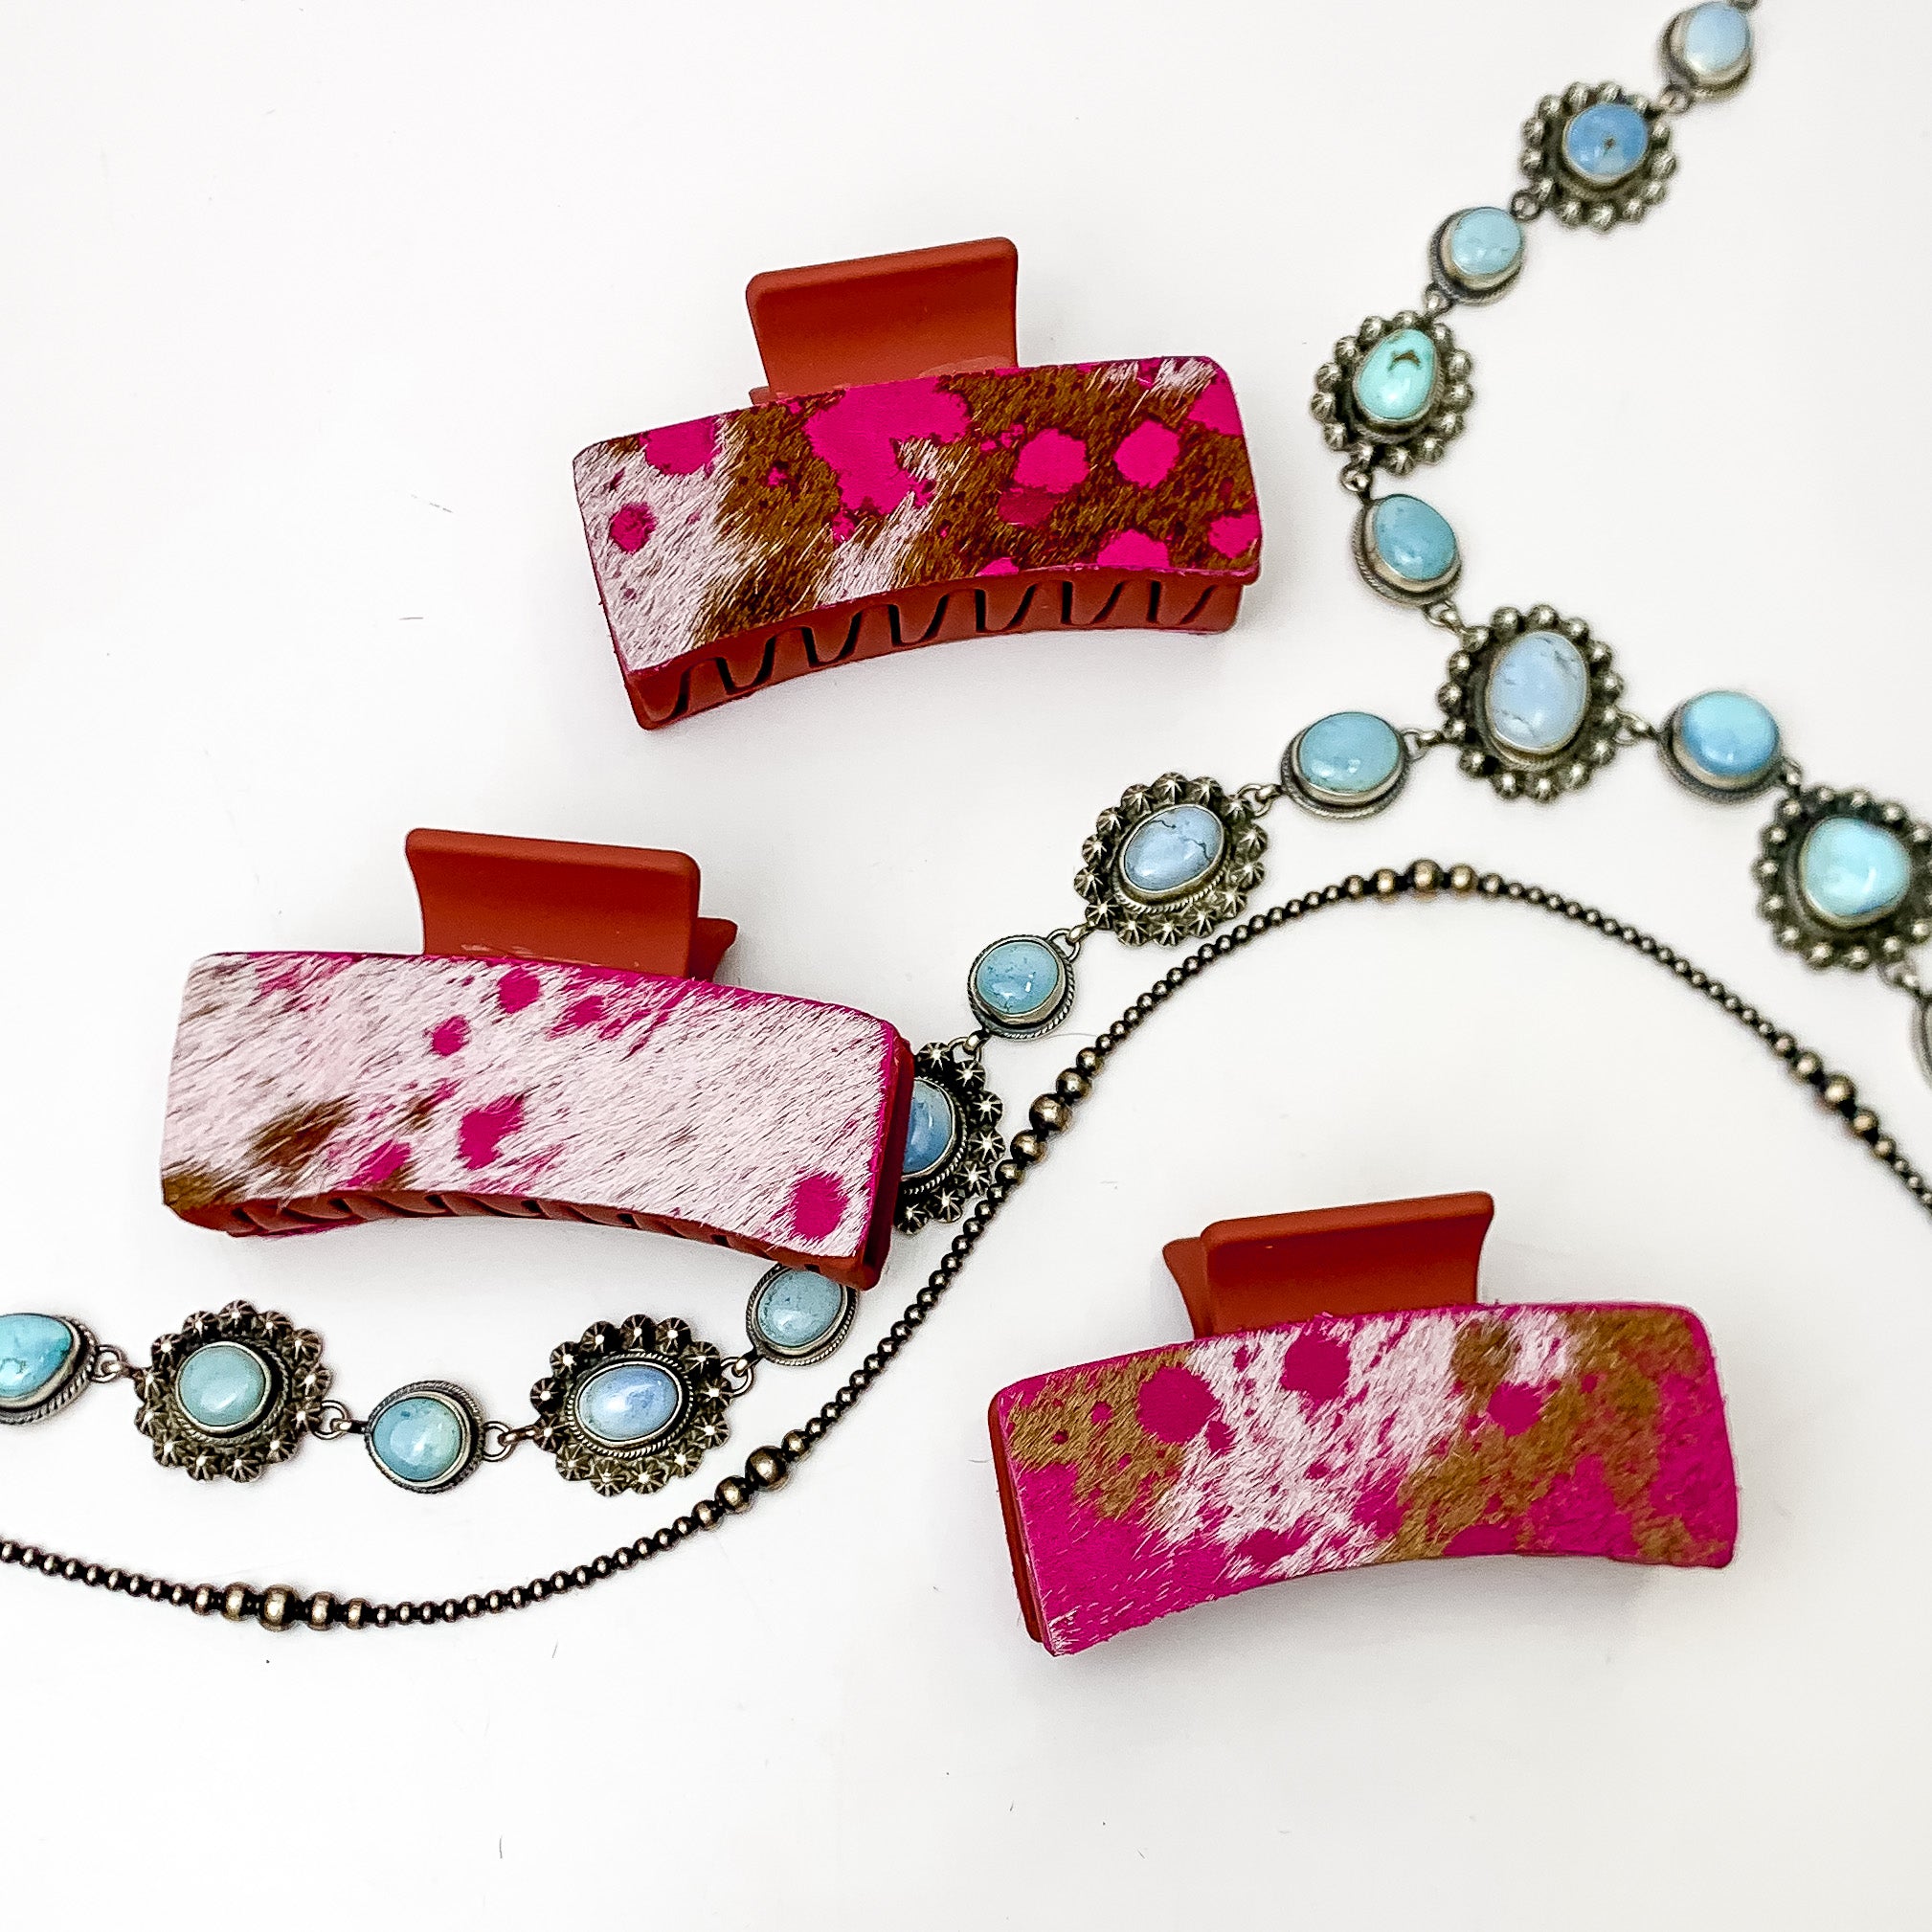 Pictured are three rust red hair clips with pink mix hide patches. These earrings are pictured on a white background with silver necklaces under the clips. 